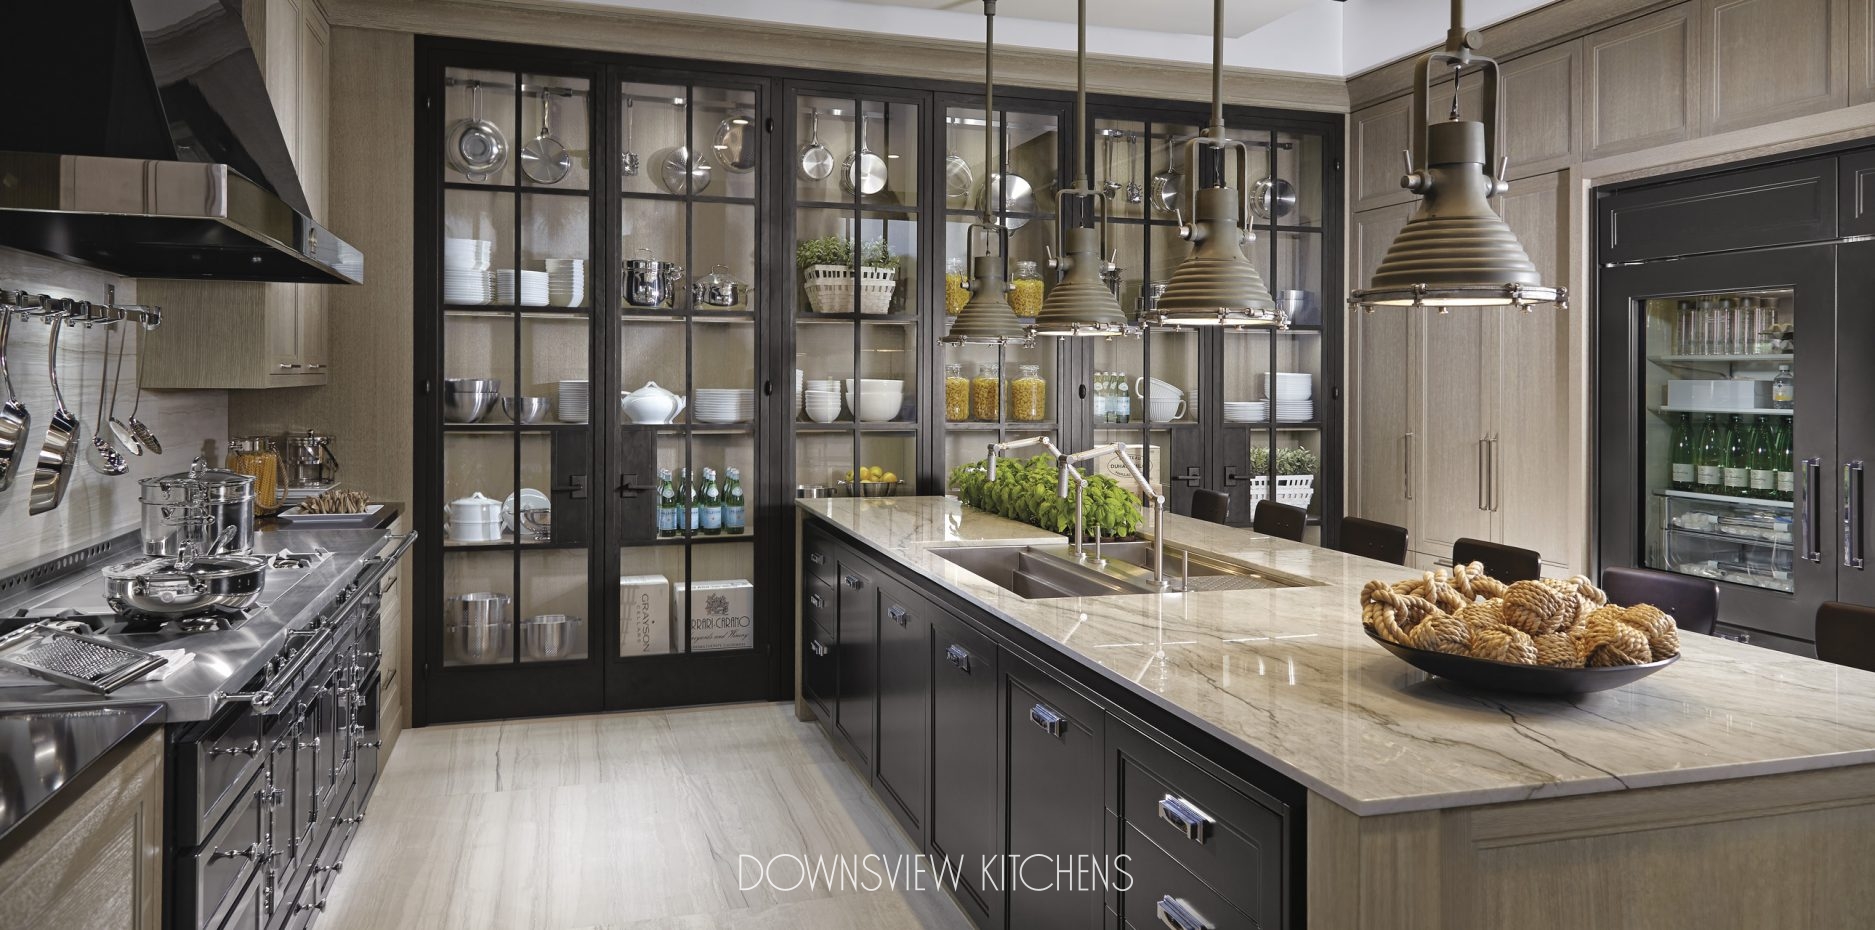 Industrial Chic Downsview Kitchens And Fine Custom Cabinetry Manufacturers Of Custom Kitchen Cabinets